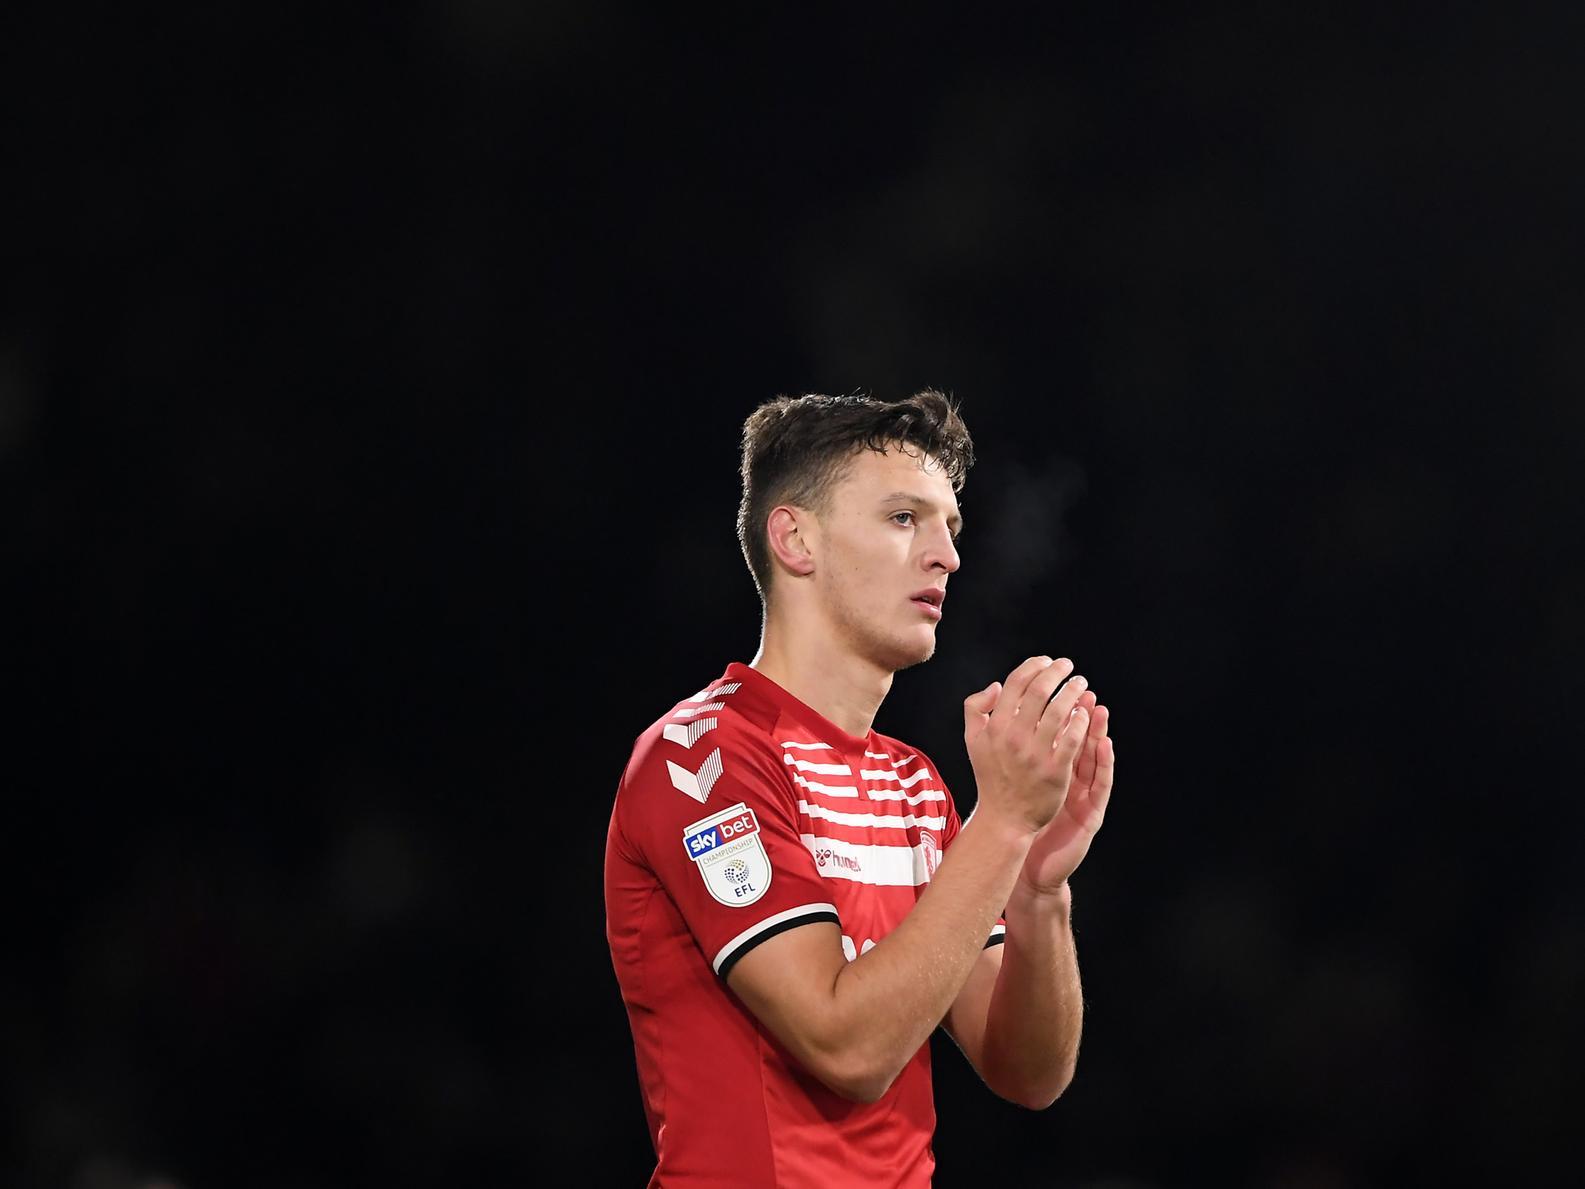 Burnley have been linked with a big money move for the Boro defender, with manager Jonathan Woodgate recently saying it would take 30m to tempt him.